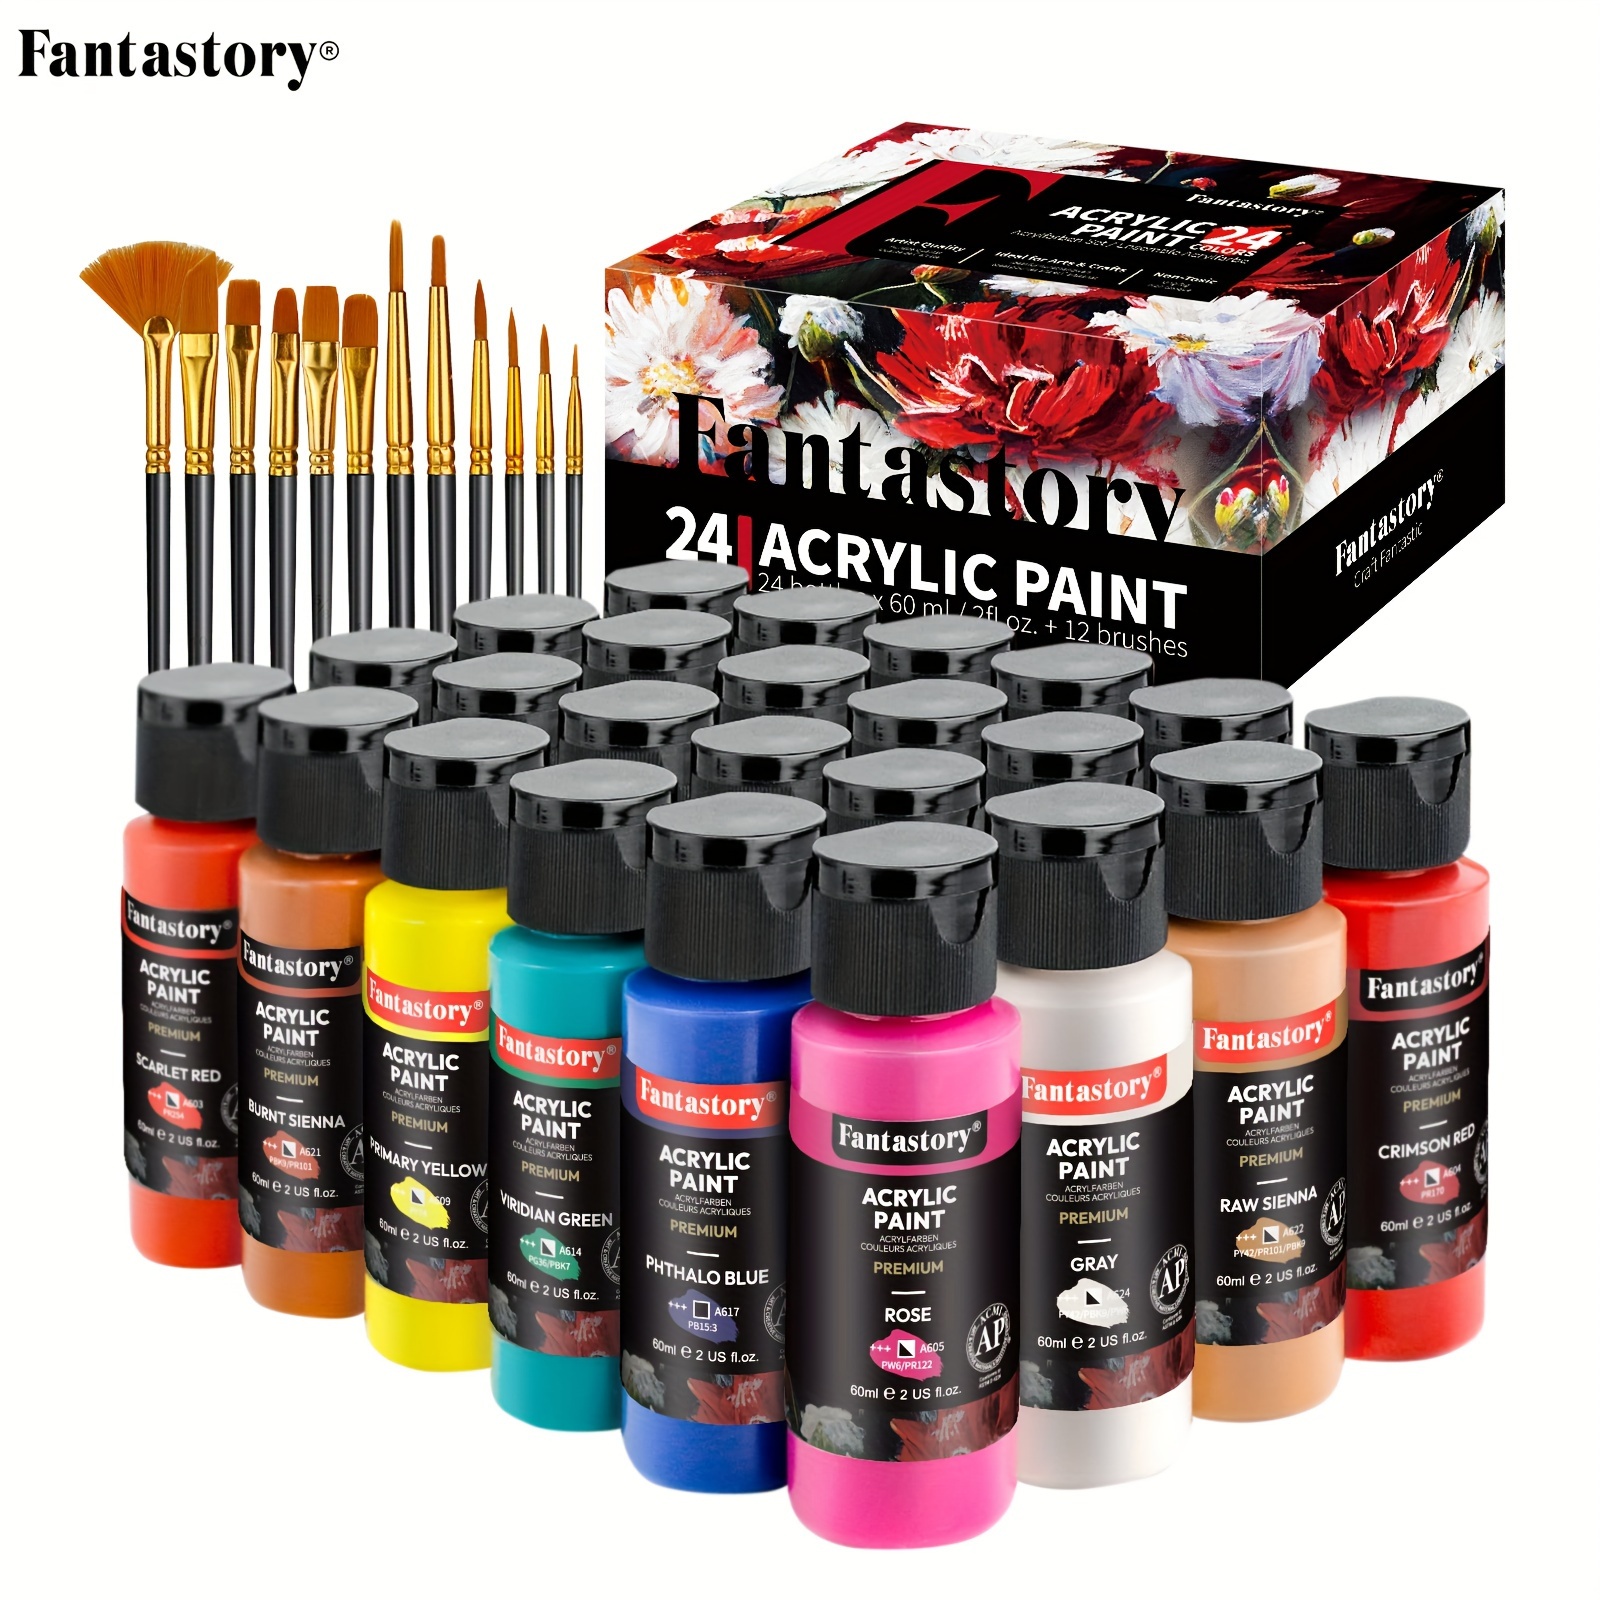 

Fantastory Acrylic Paint Set, 24 Classic Colors(2oz/60ml), Professional Craft Paint, Art Supplies Kit For Adults, Canvas/fabric/rock/glass/stone Ceramic Model Wood Painting With 12 Brushes